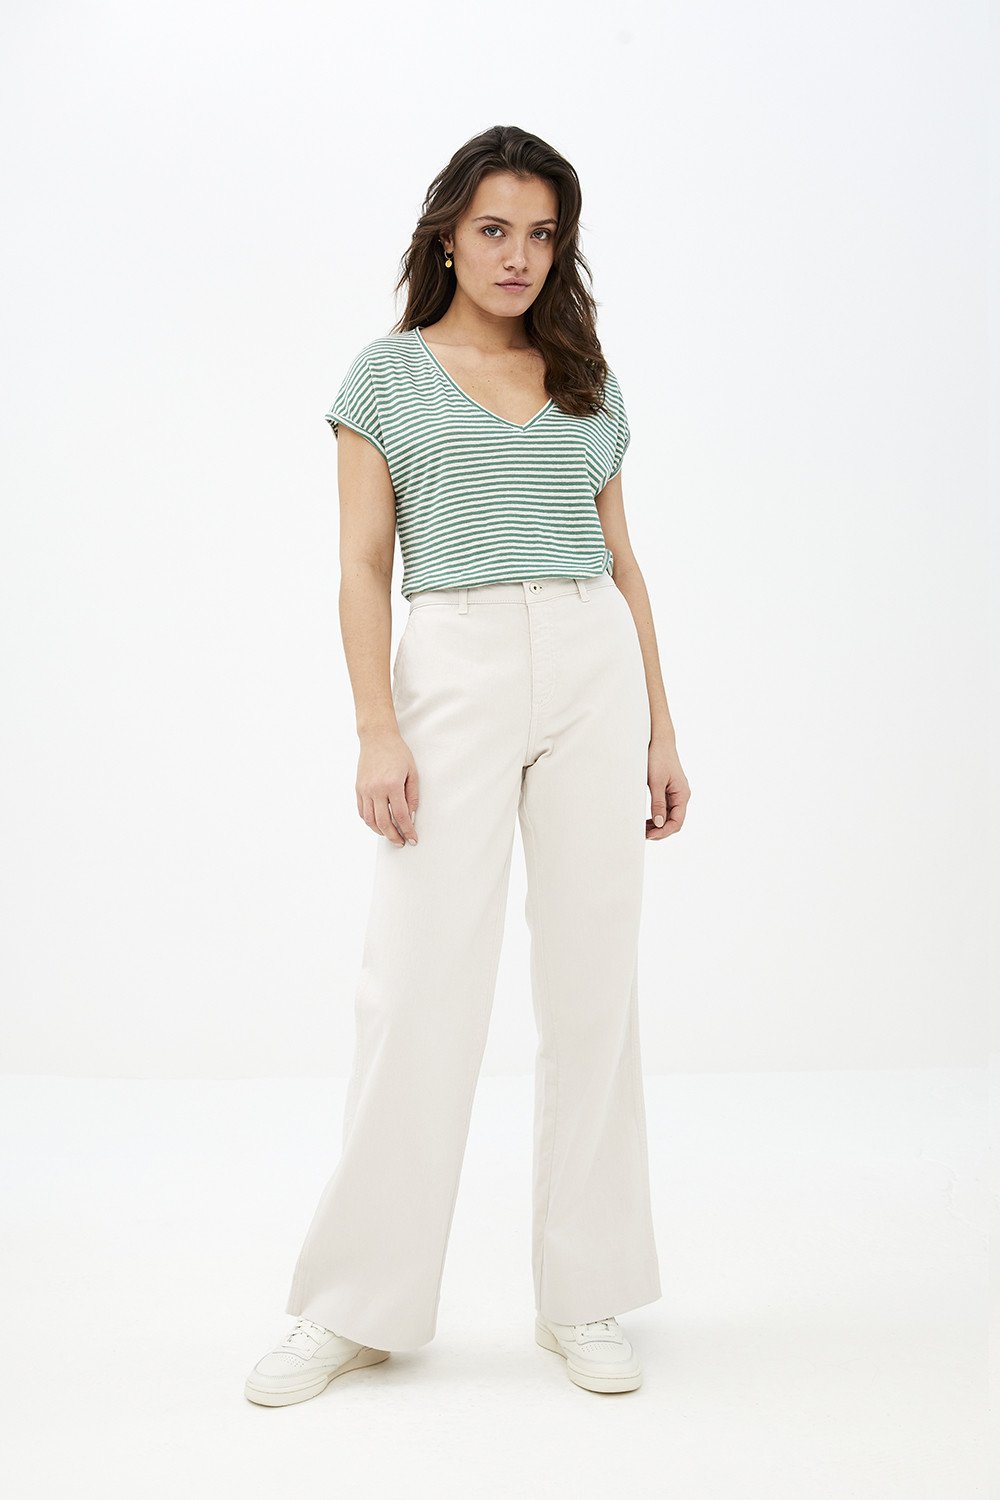 By-Bar - mila linen agave green stripe top